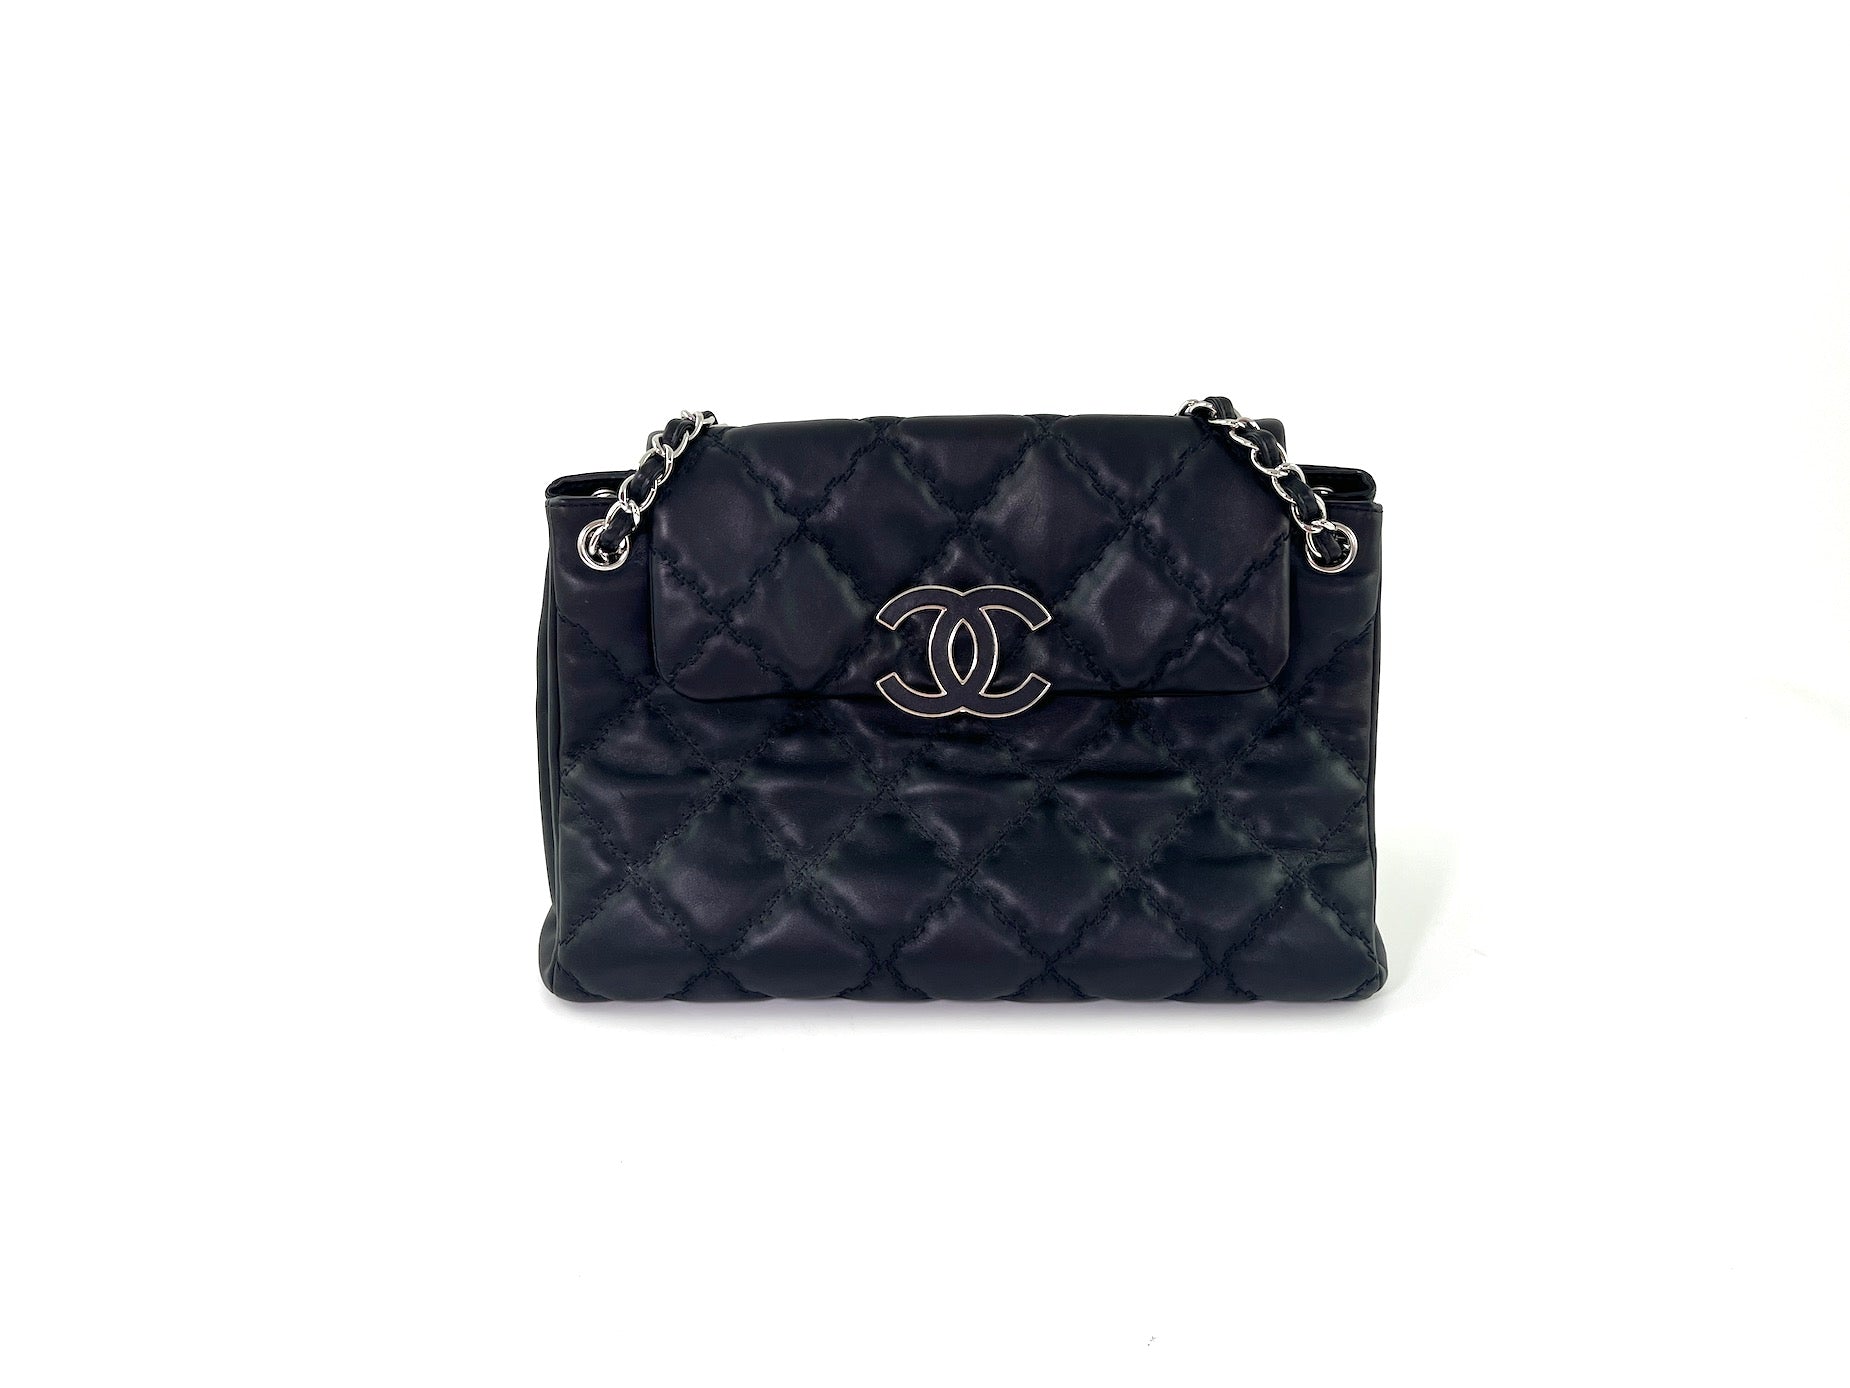 CHANEL Double Stitch Hamptons Black Quilted Calfskin Shopping Tote Bag